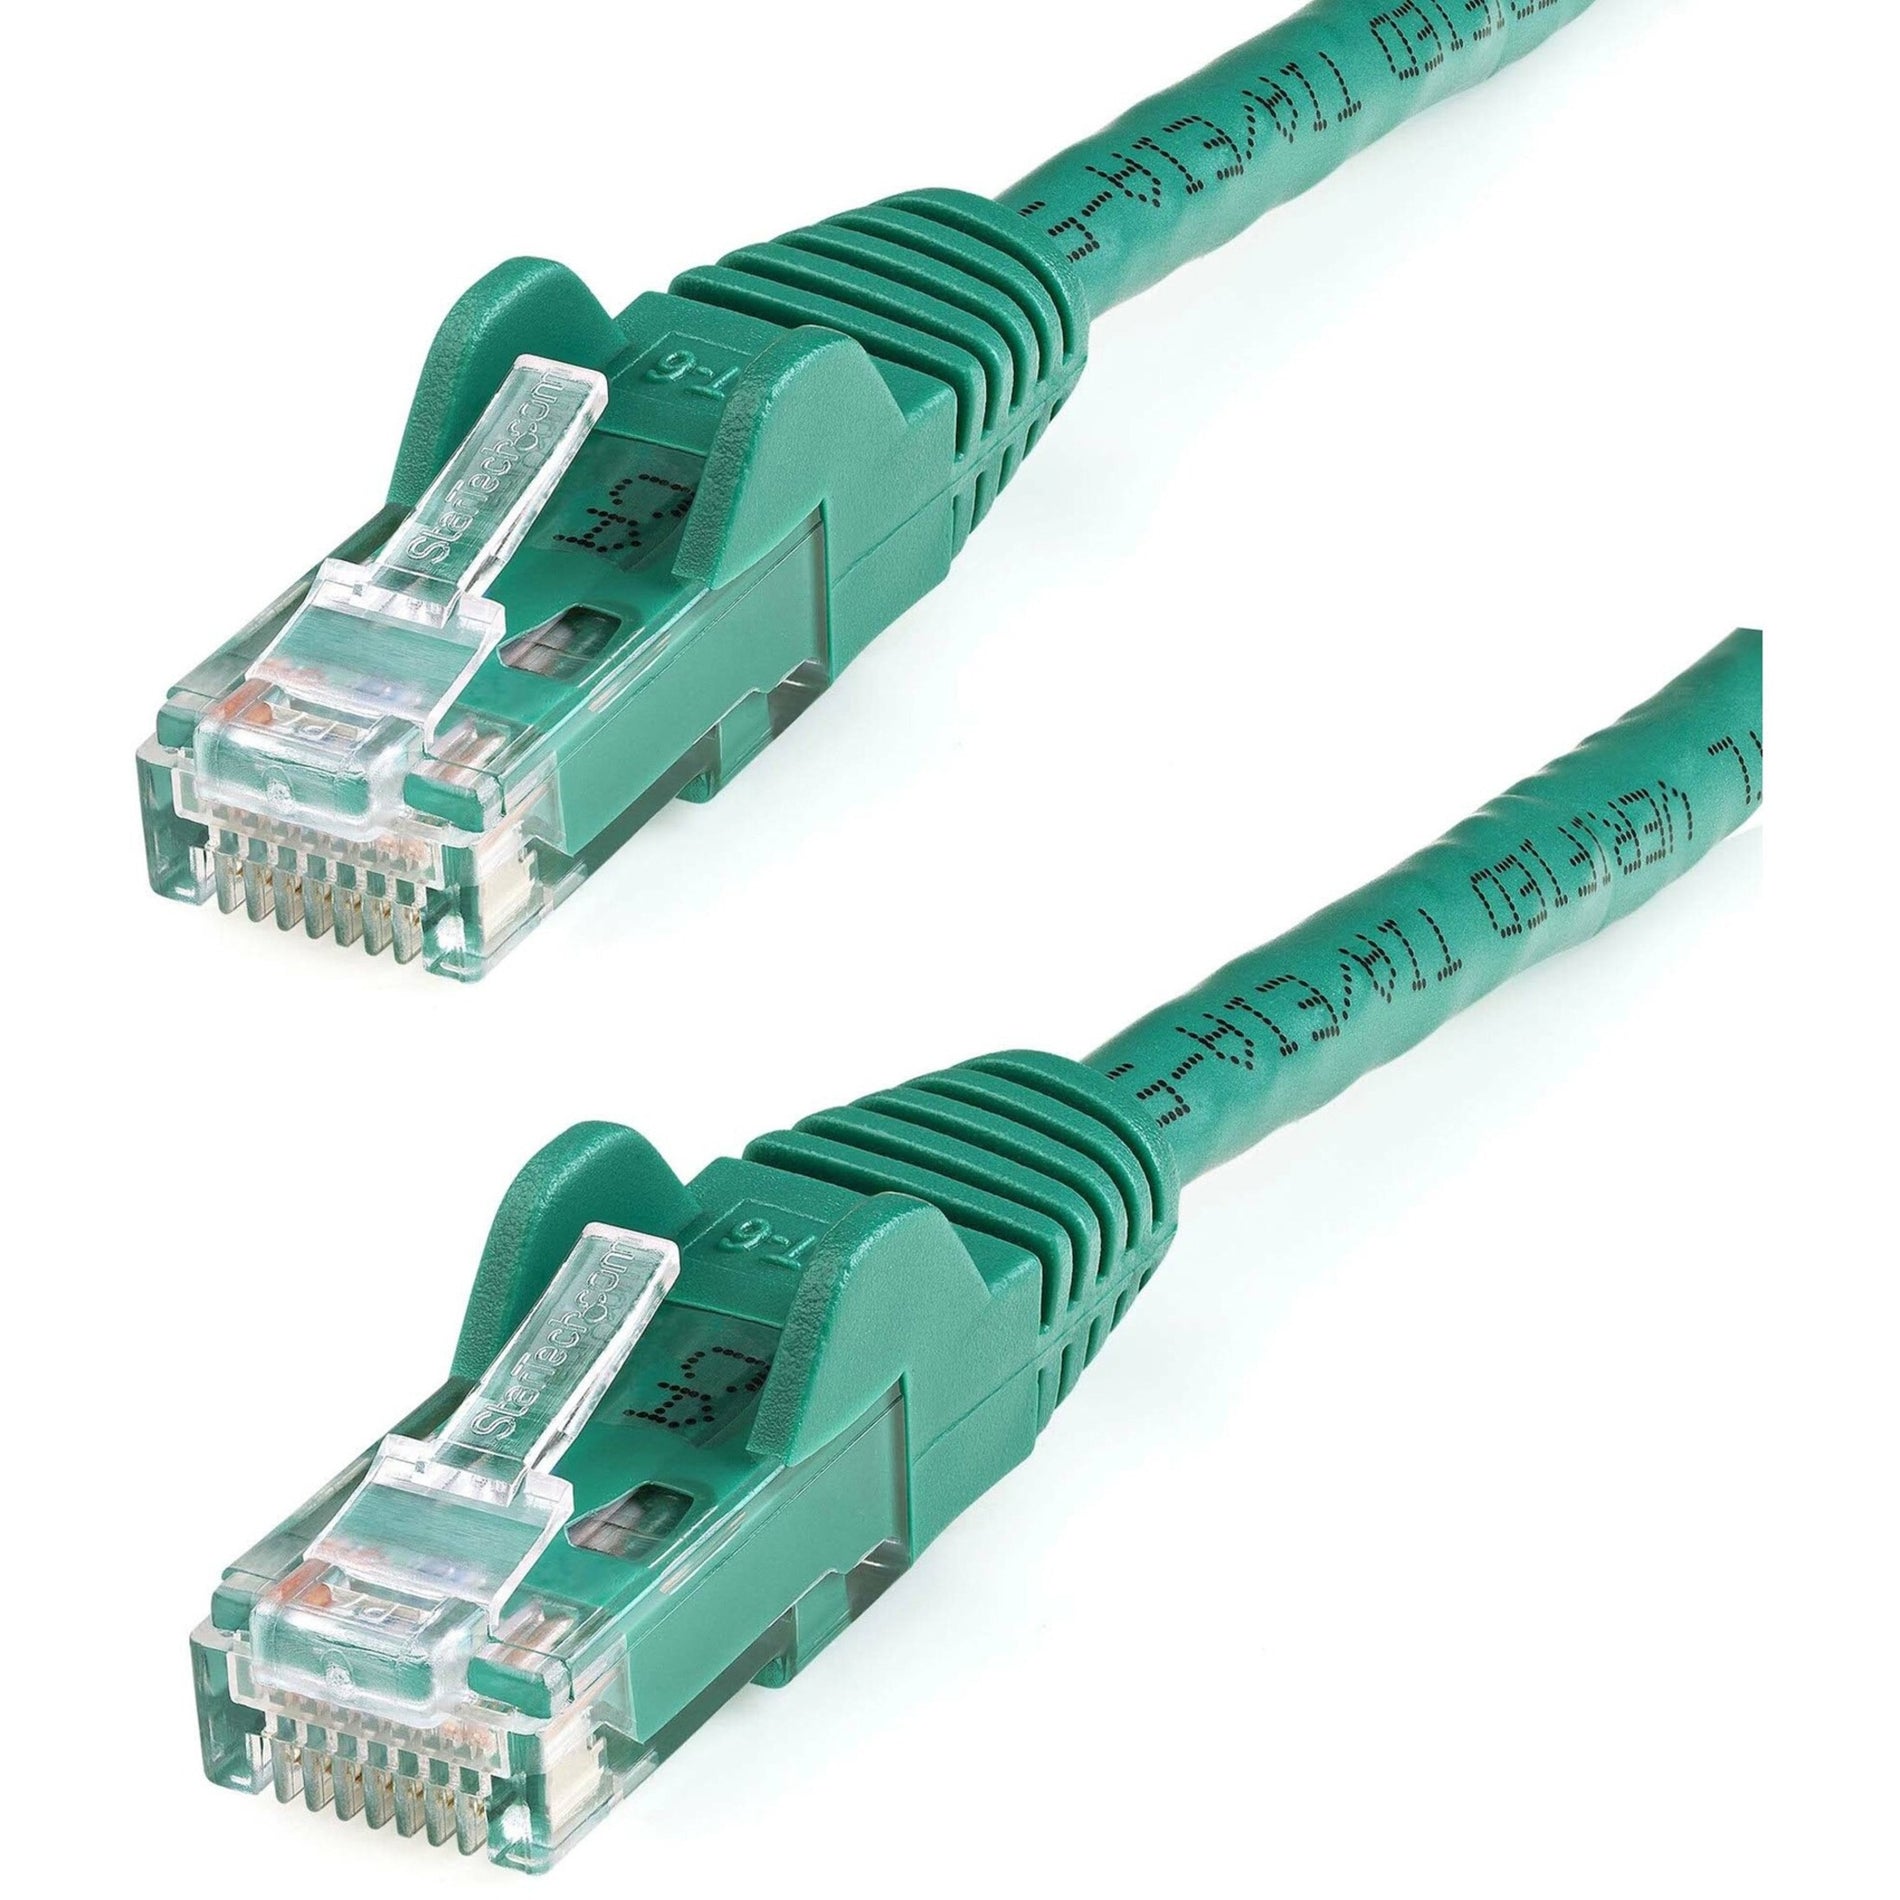 StarTech.com N6PATCH100GN 100 ft Green Snagless Cat6 UTP Patch Cable, Lifetime Warranty, 10 Gbit/s Data Transfer Rate, Rust Resistant